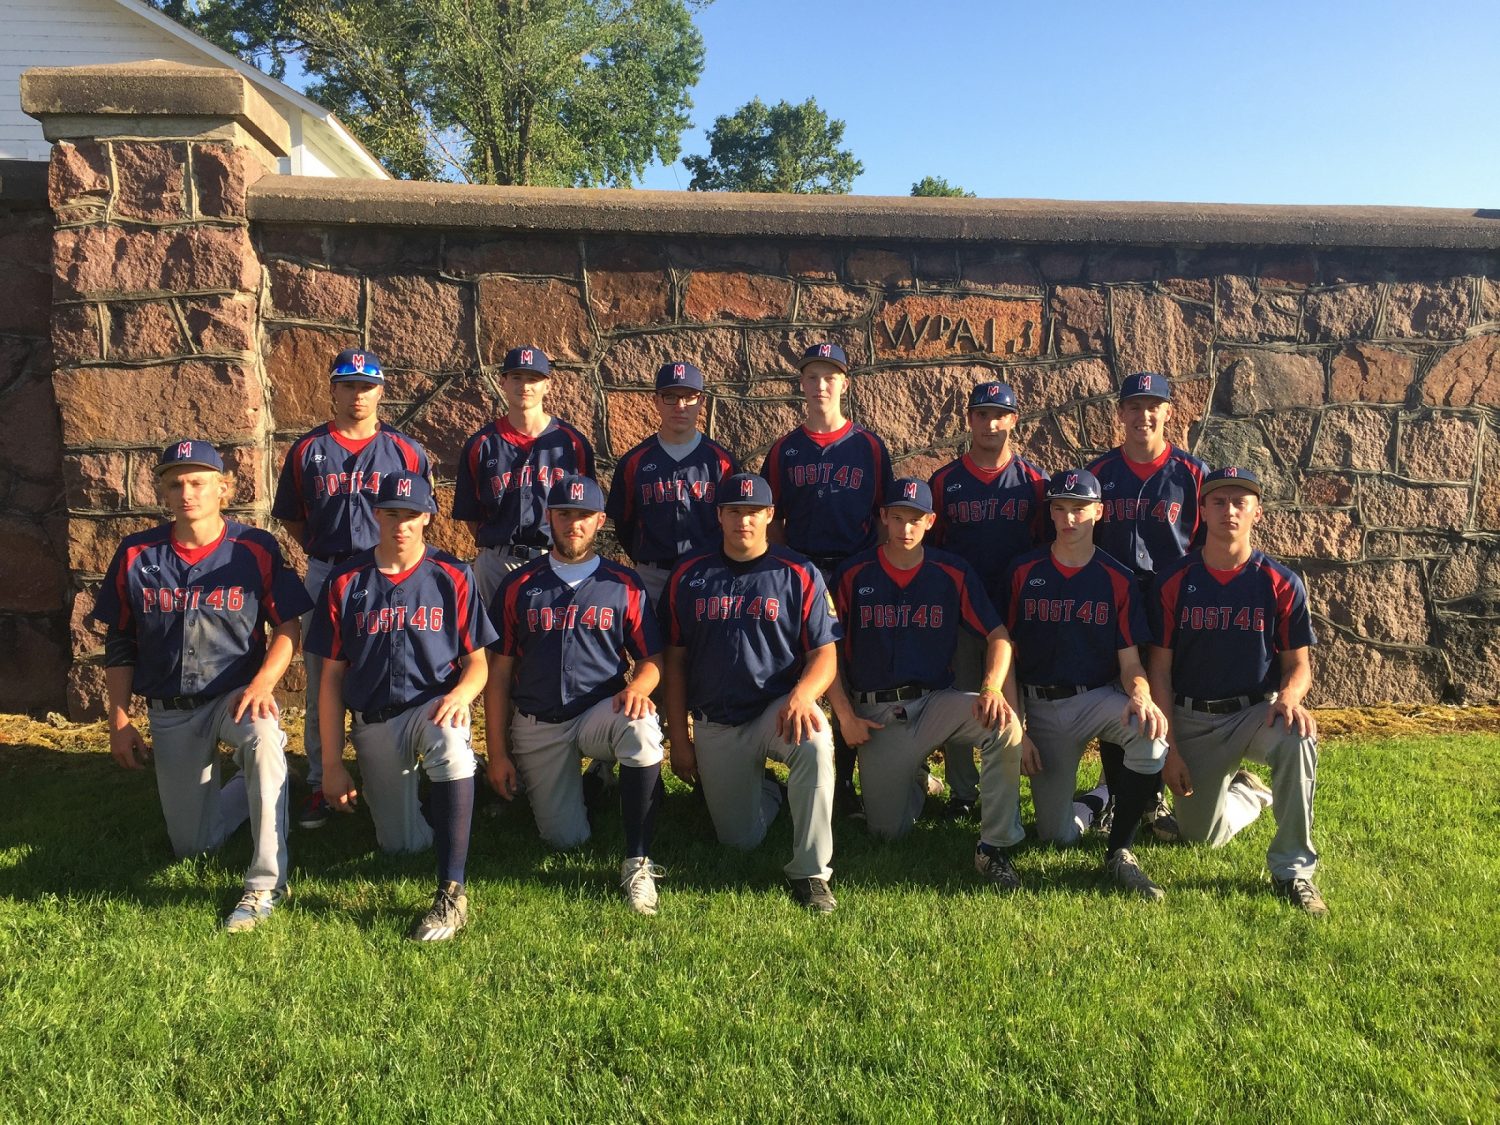 Post 46 gets swept in Merrill tournament